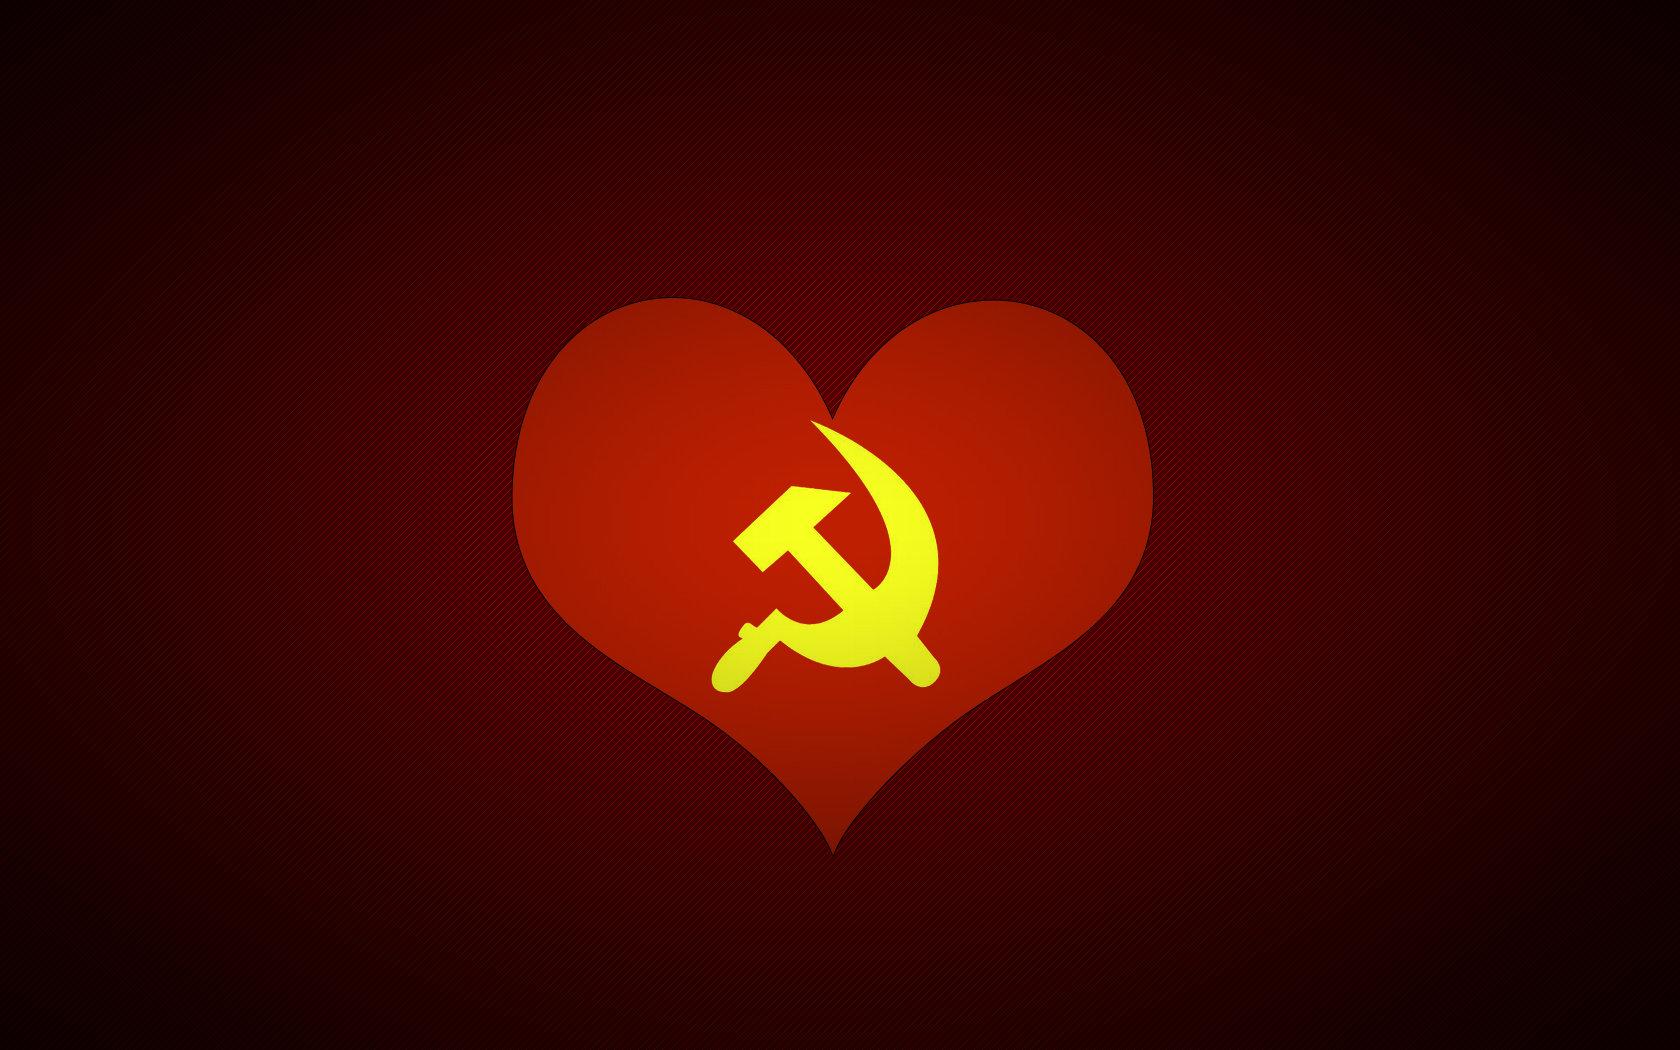 Communist Wallpapers Top Free Communist Backgrounds Images, Photos, Reviews